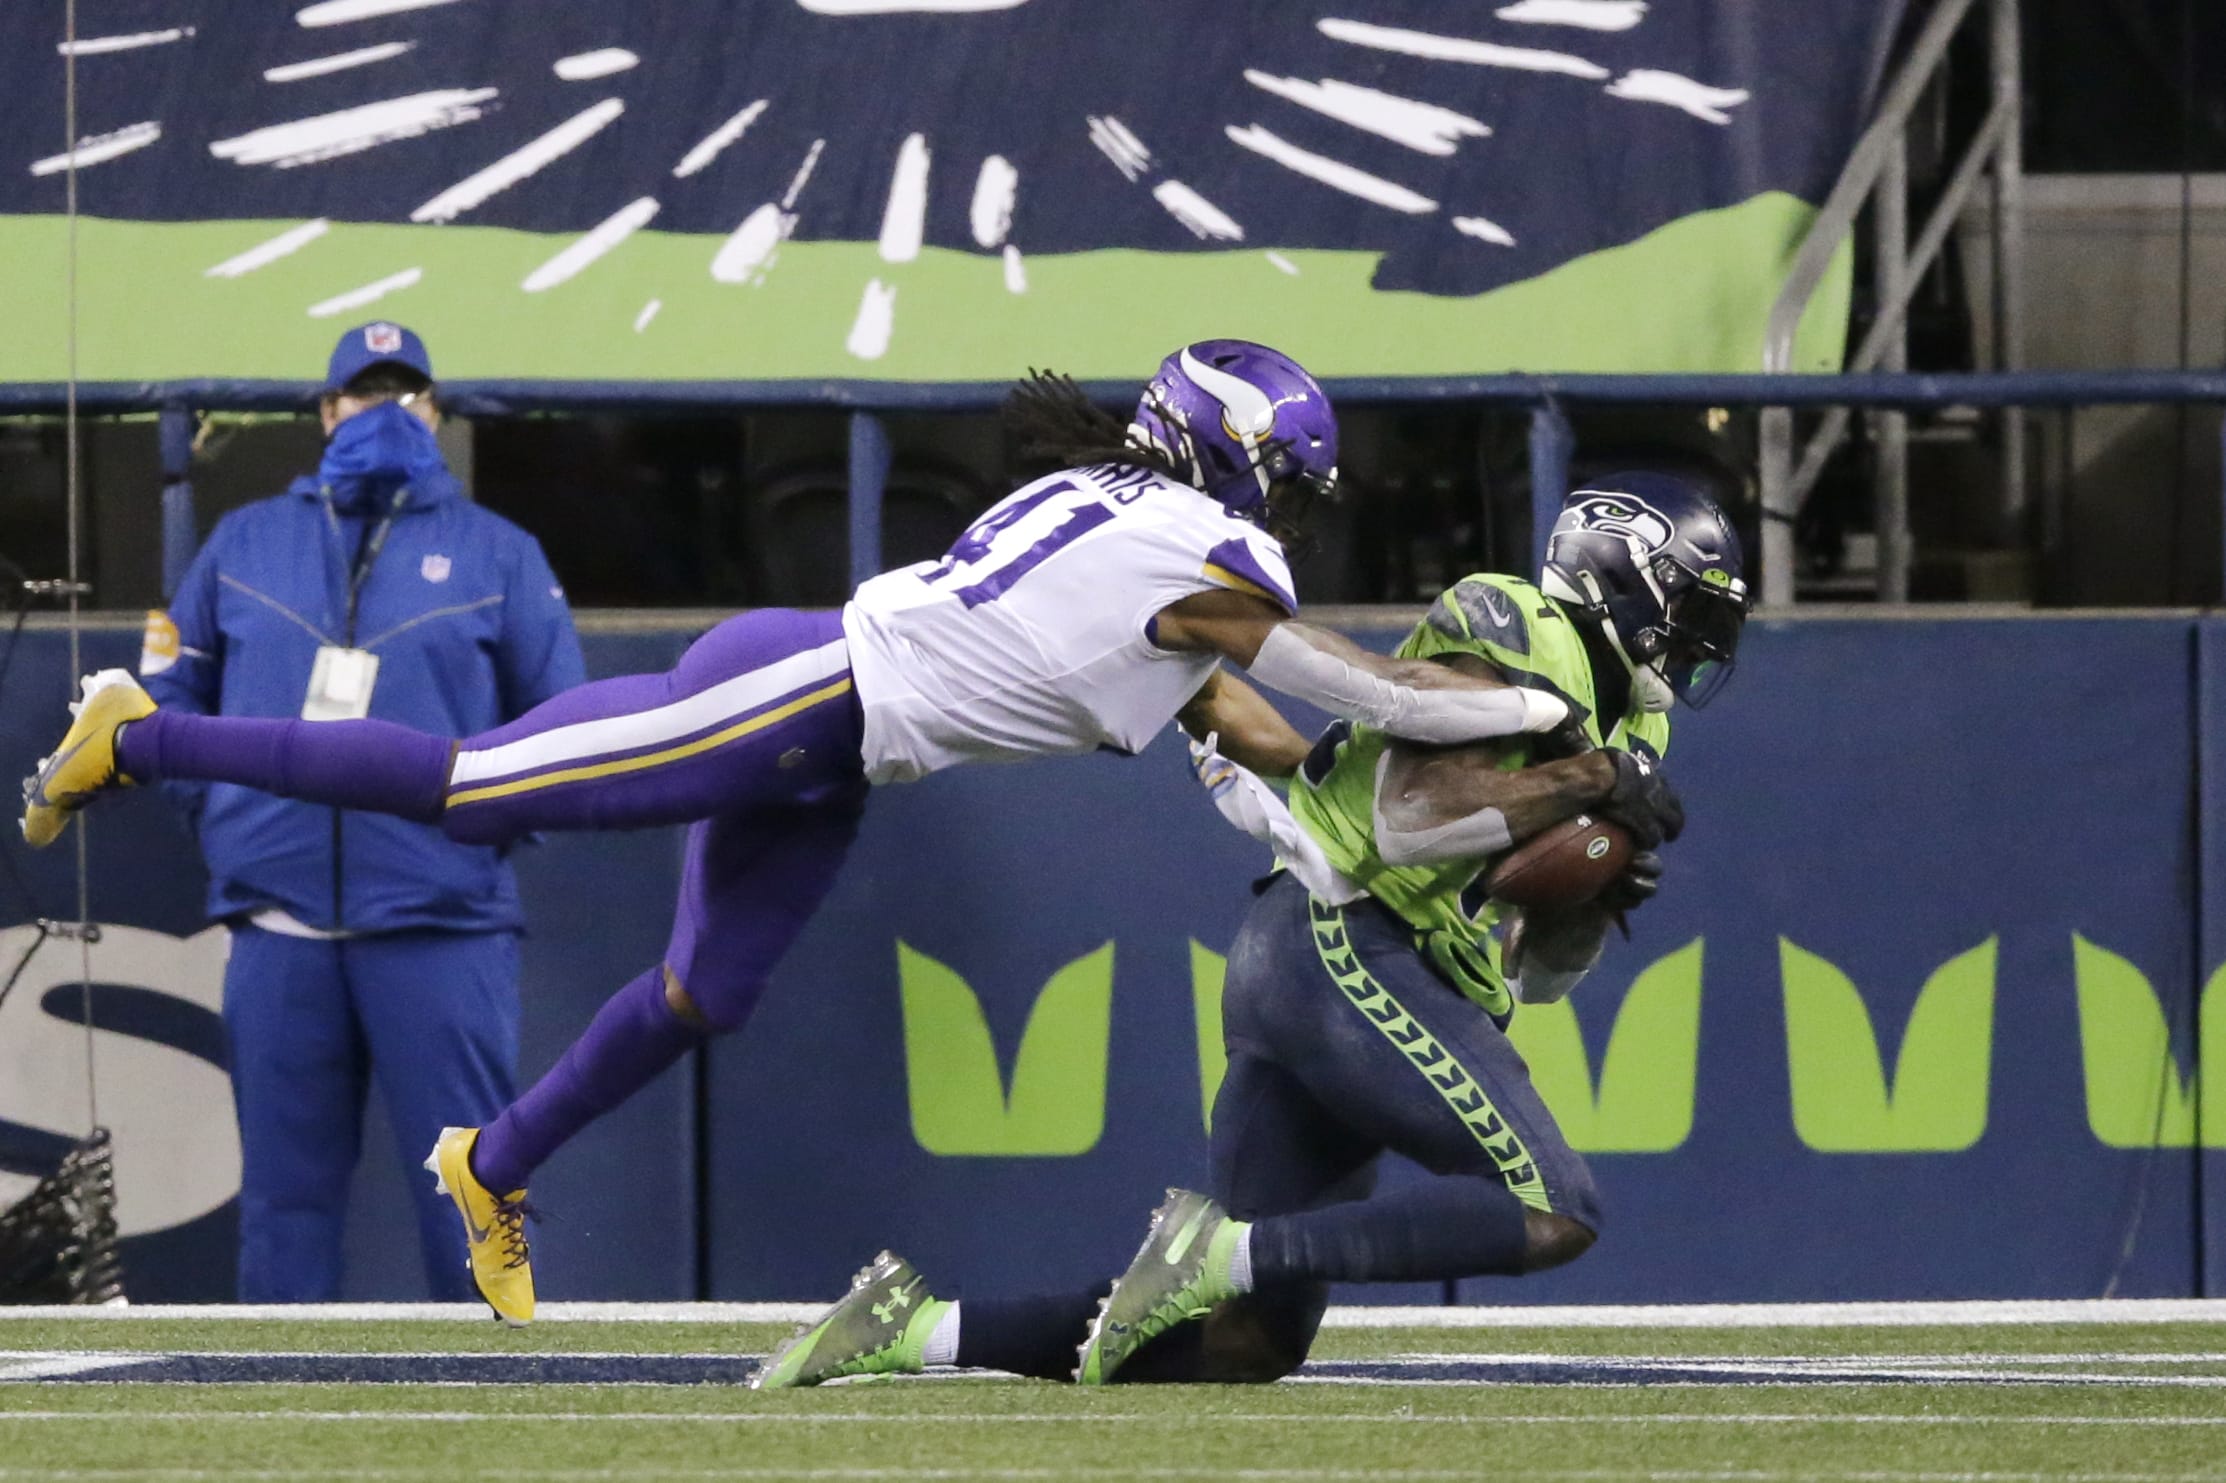 Seattle Seahawks' DK Metcalf, right, catches the ball in the end zone for a touchdown as Minnesota Vikings' Anthony Harris defends near the end of the second half of an NFL football game, Sunday, Oct. 11, 2020, in Seattle.